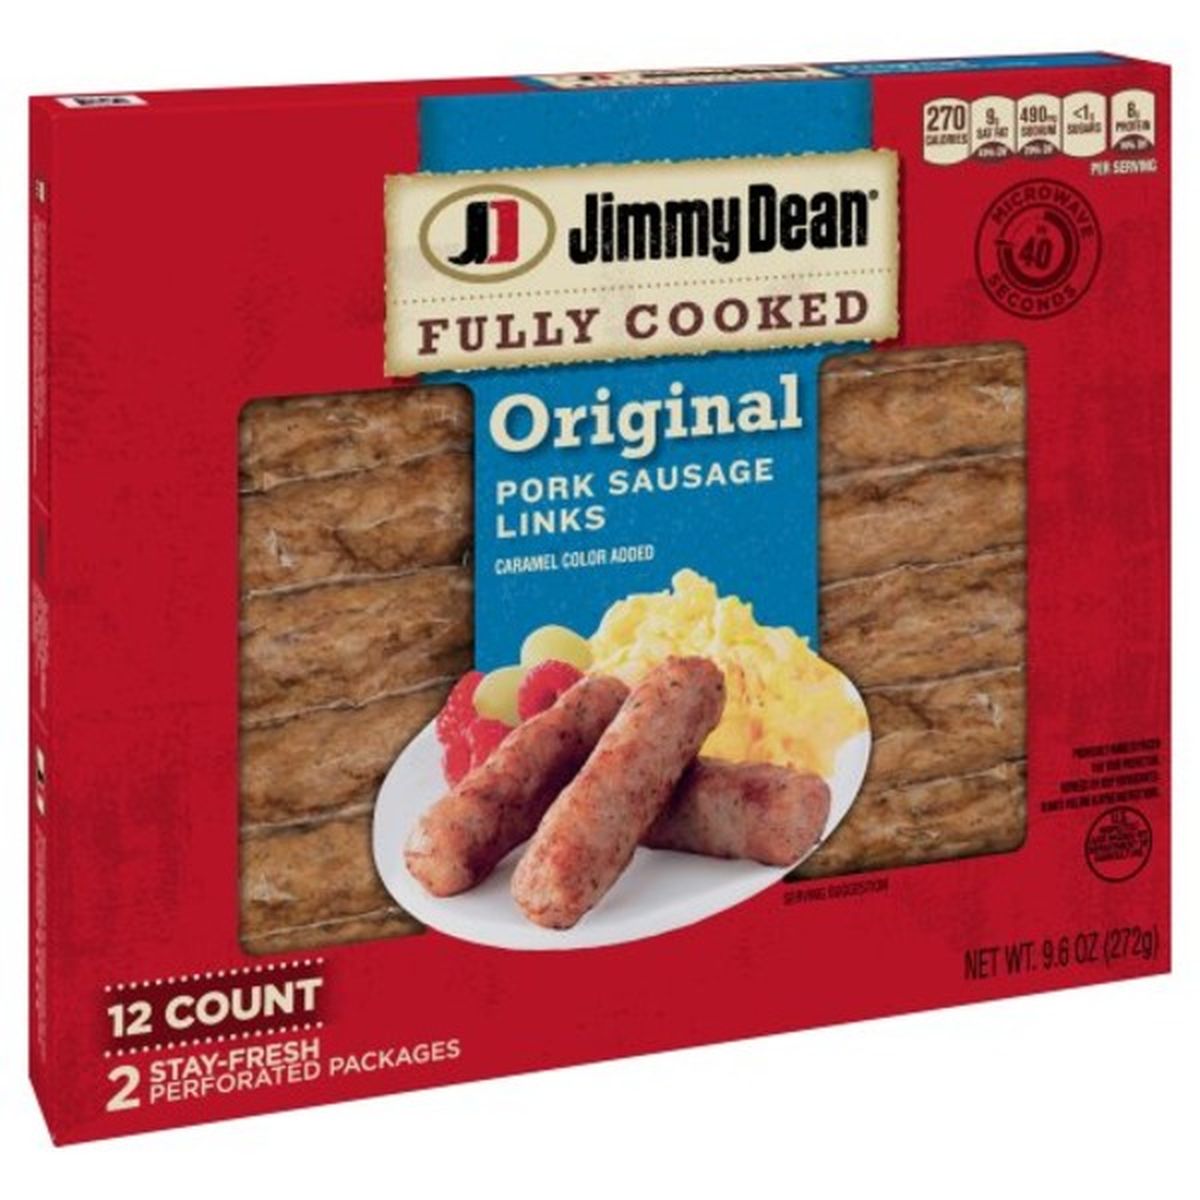 Calories in Jimmy Dean Fully Cooked Original Pork Sausage Links